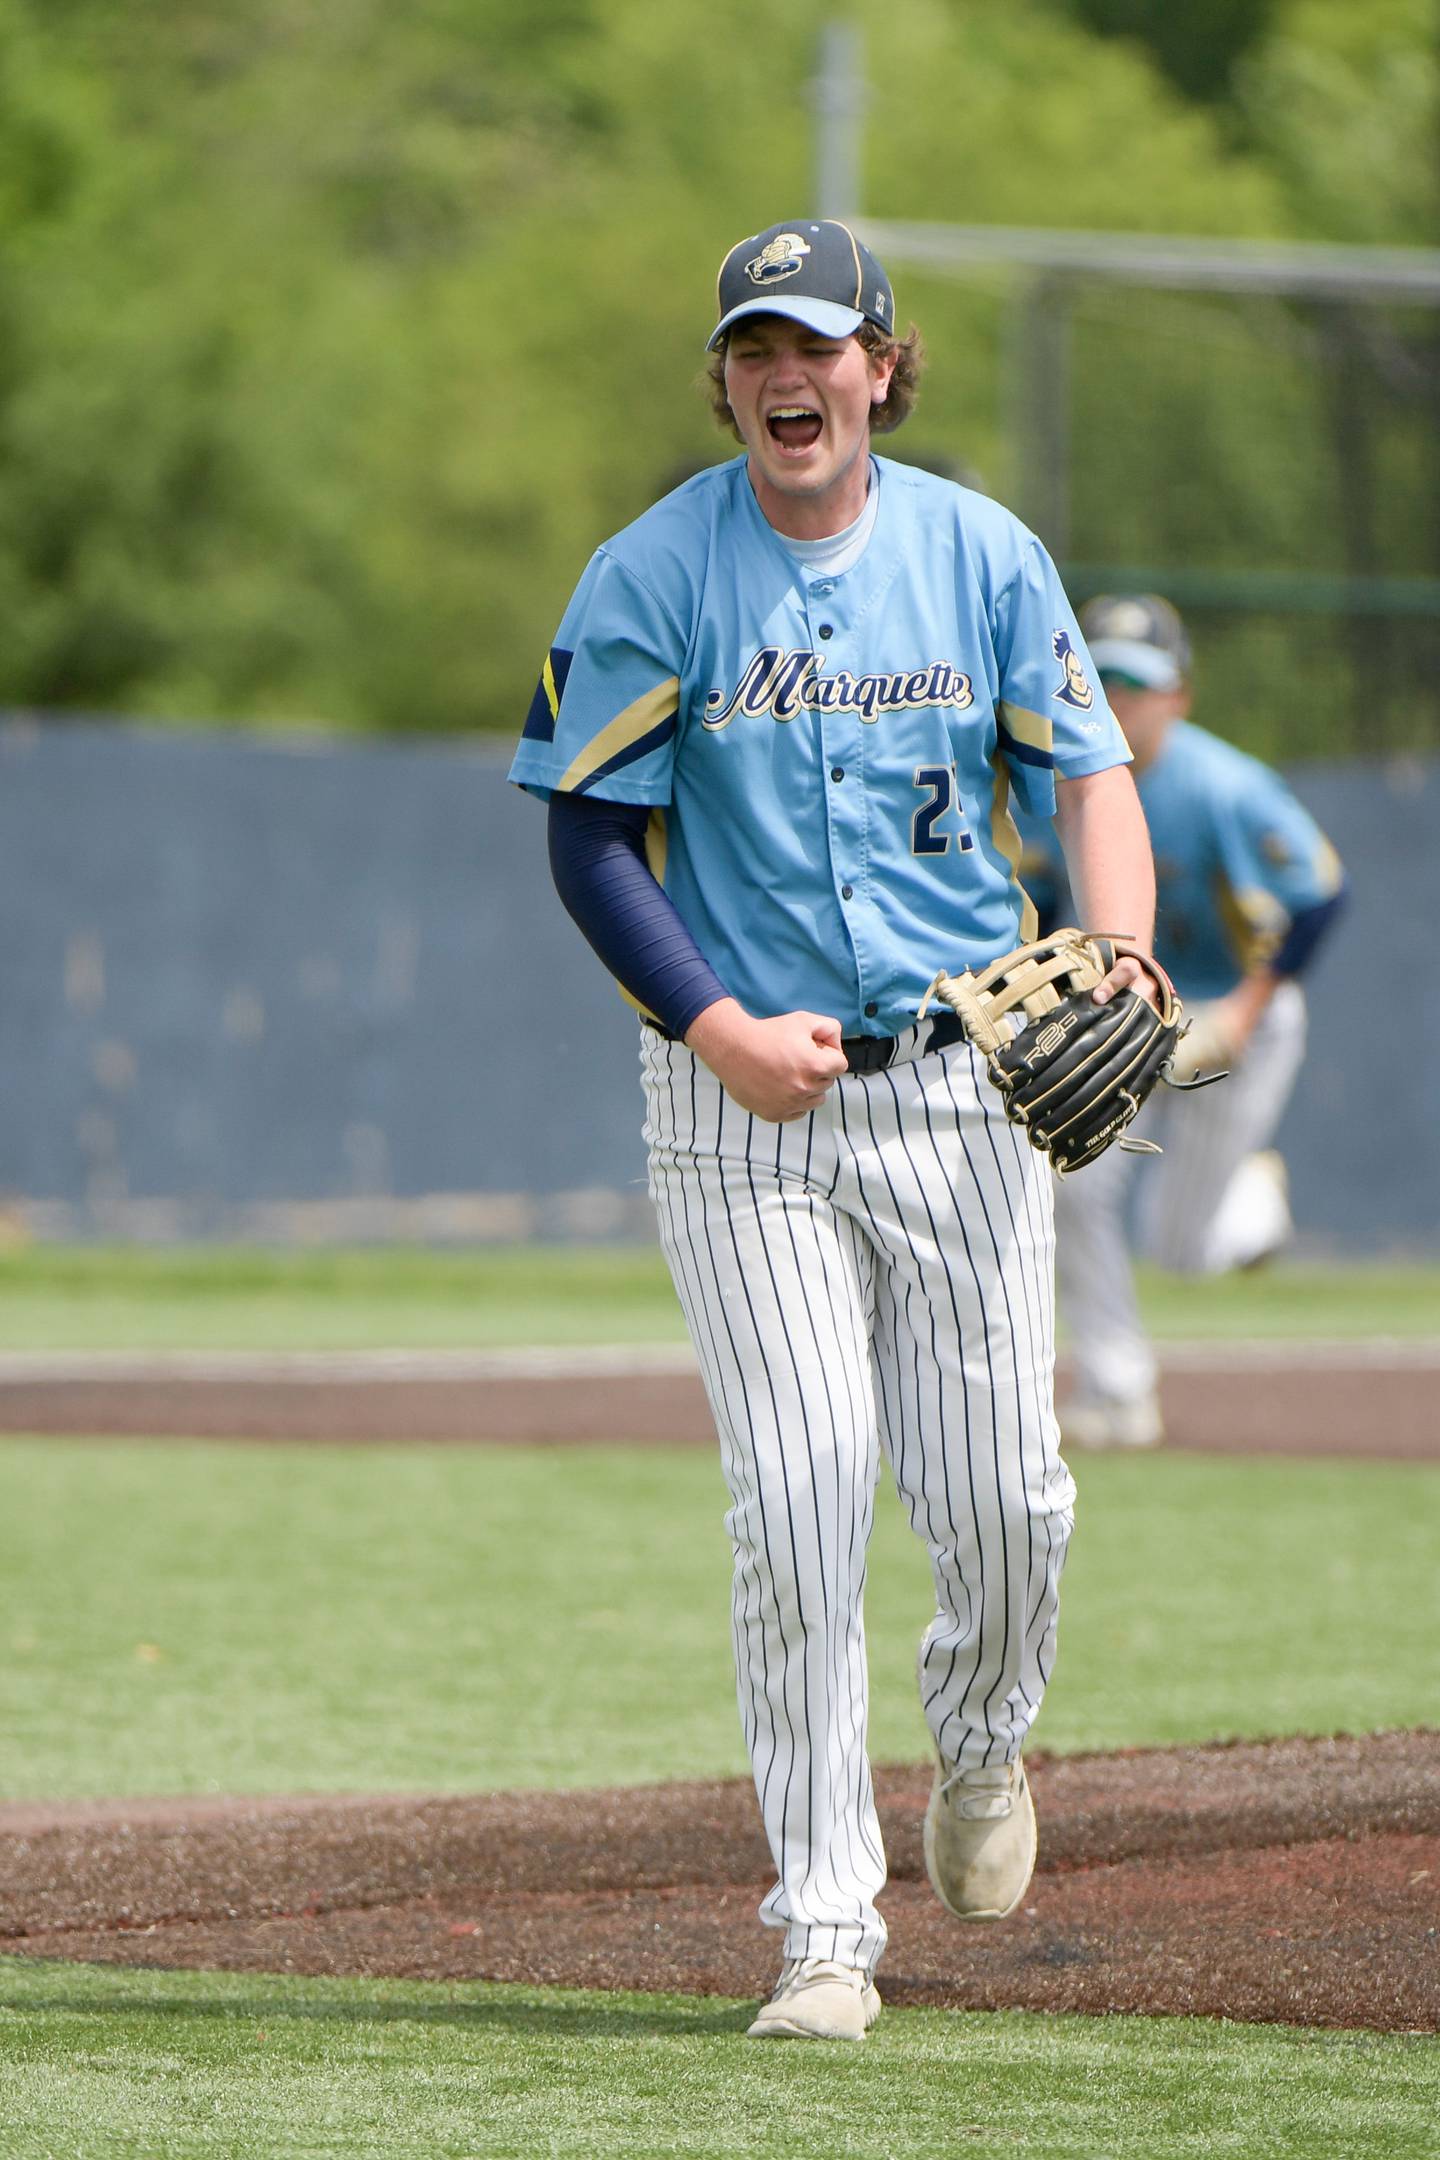 Marquette's Aiden Thompson (25) celebrates retiring the side during the fourth inning of the 1A Harvest Christian Sectional at Judson College in Elgin on Saturday, May 28, 2022.